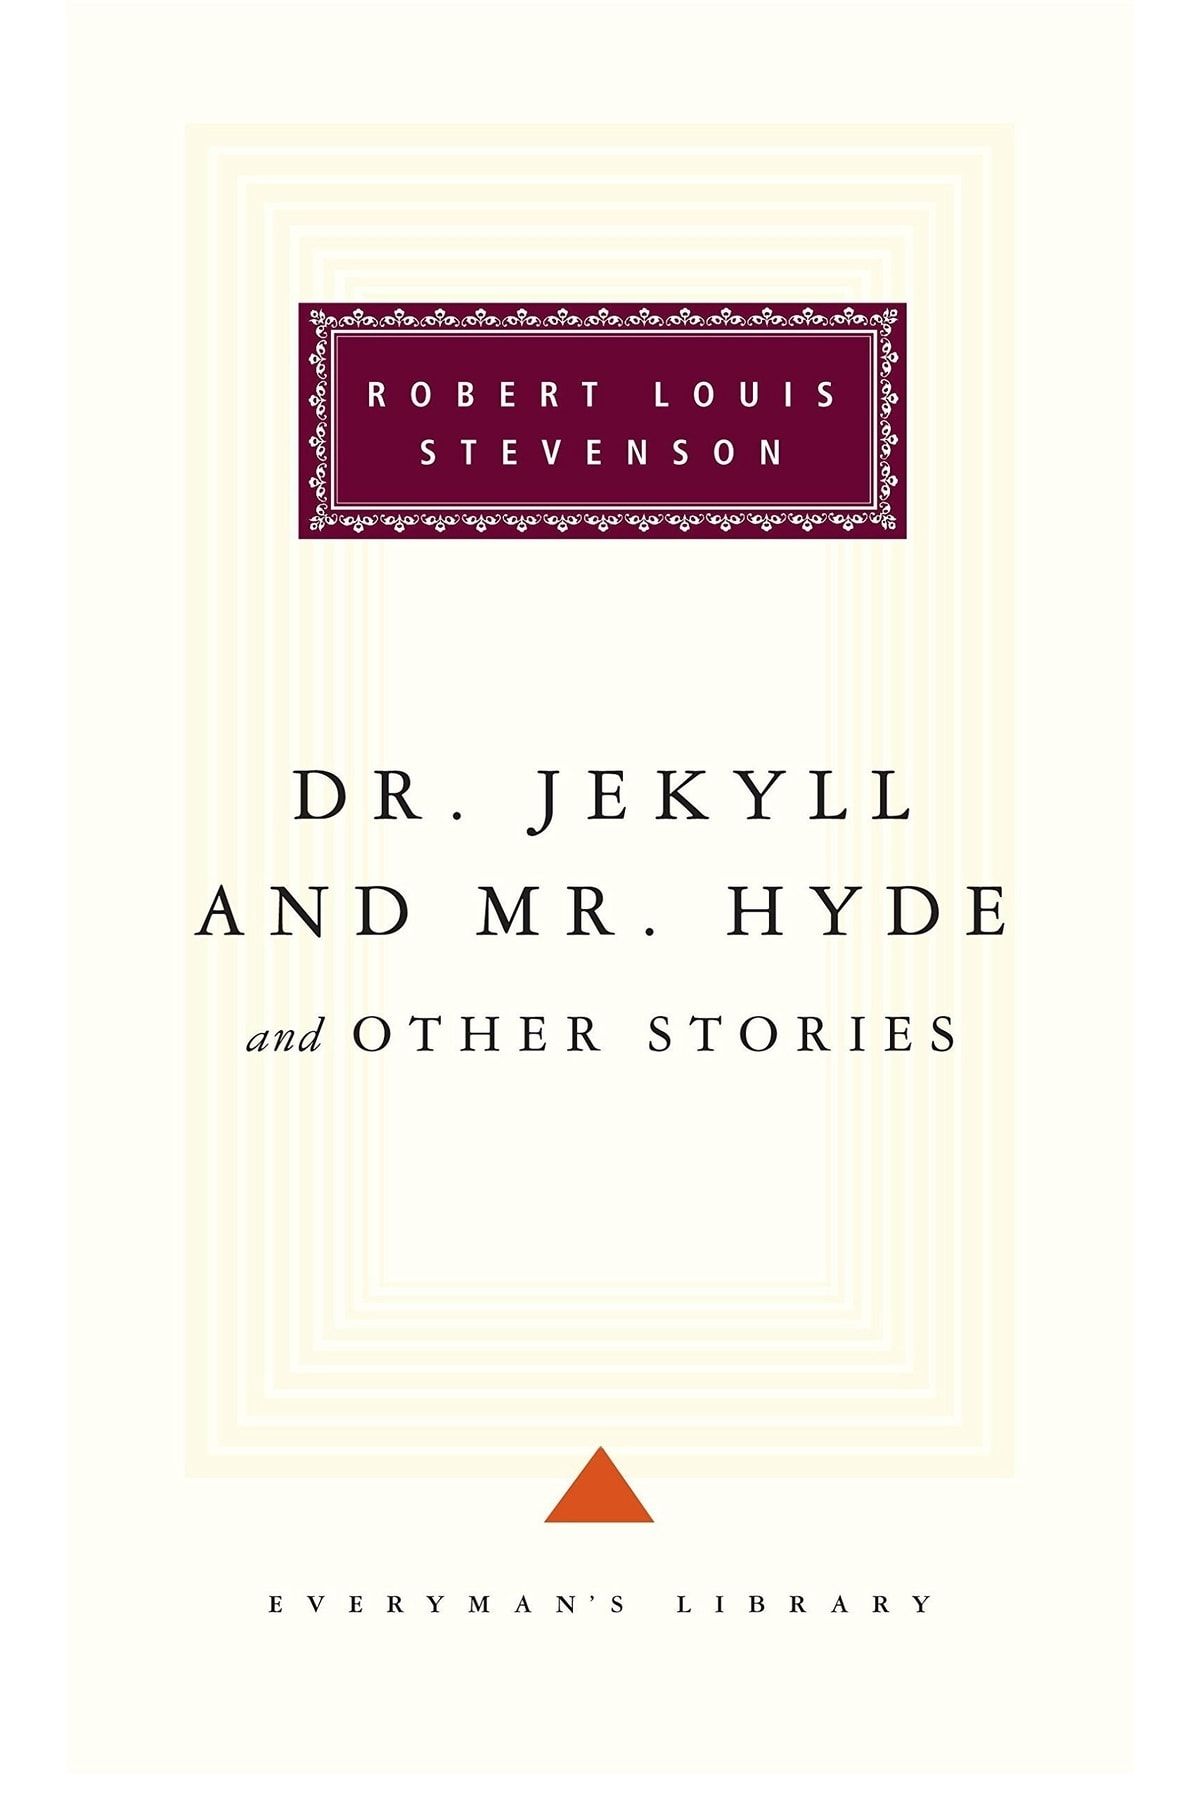 Kolektif Kitap Dr Jekyll And Mr Hyde And Other Stories